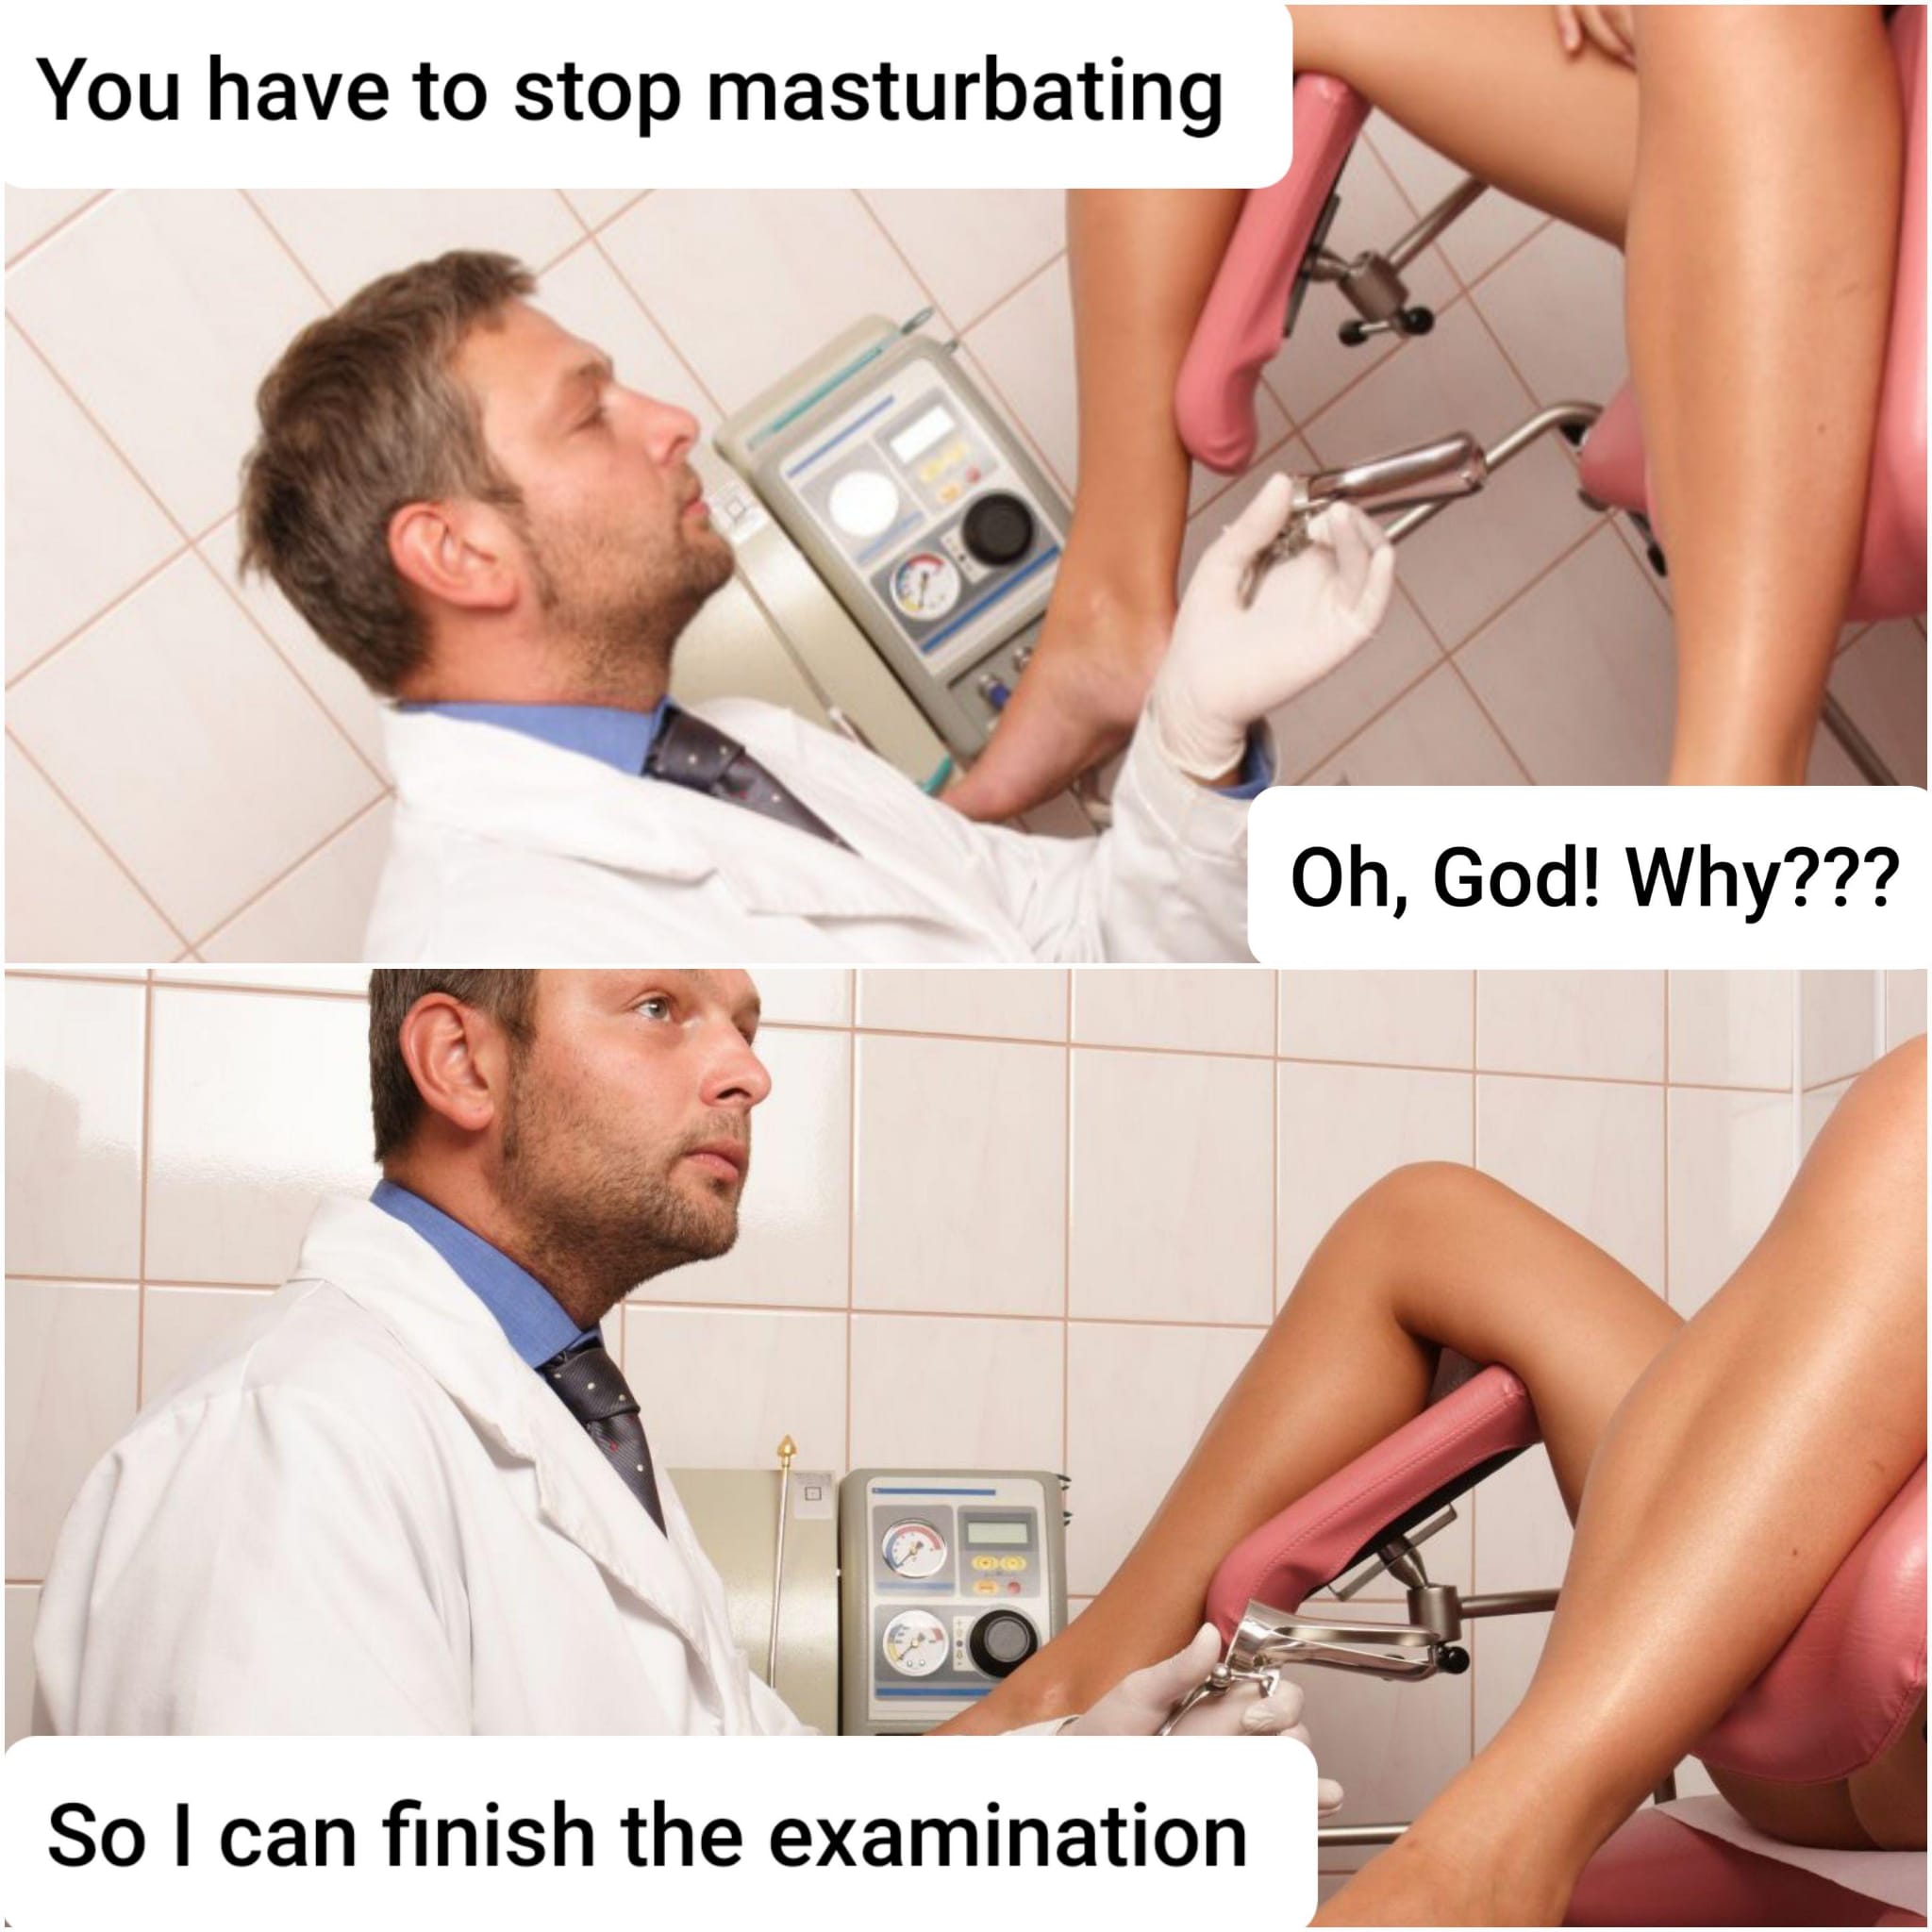 You have to stop masturbating